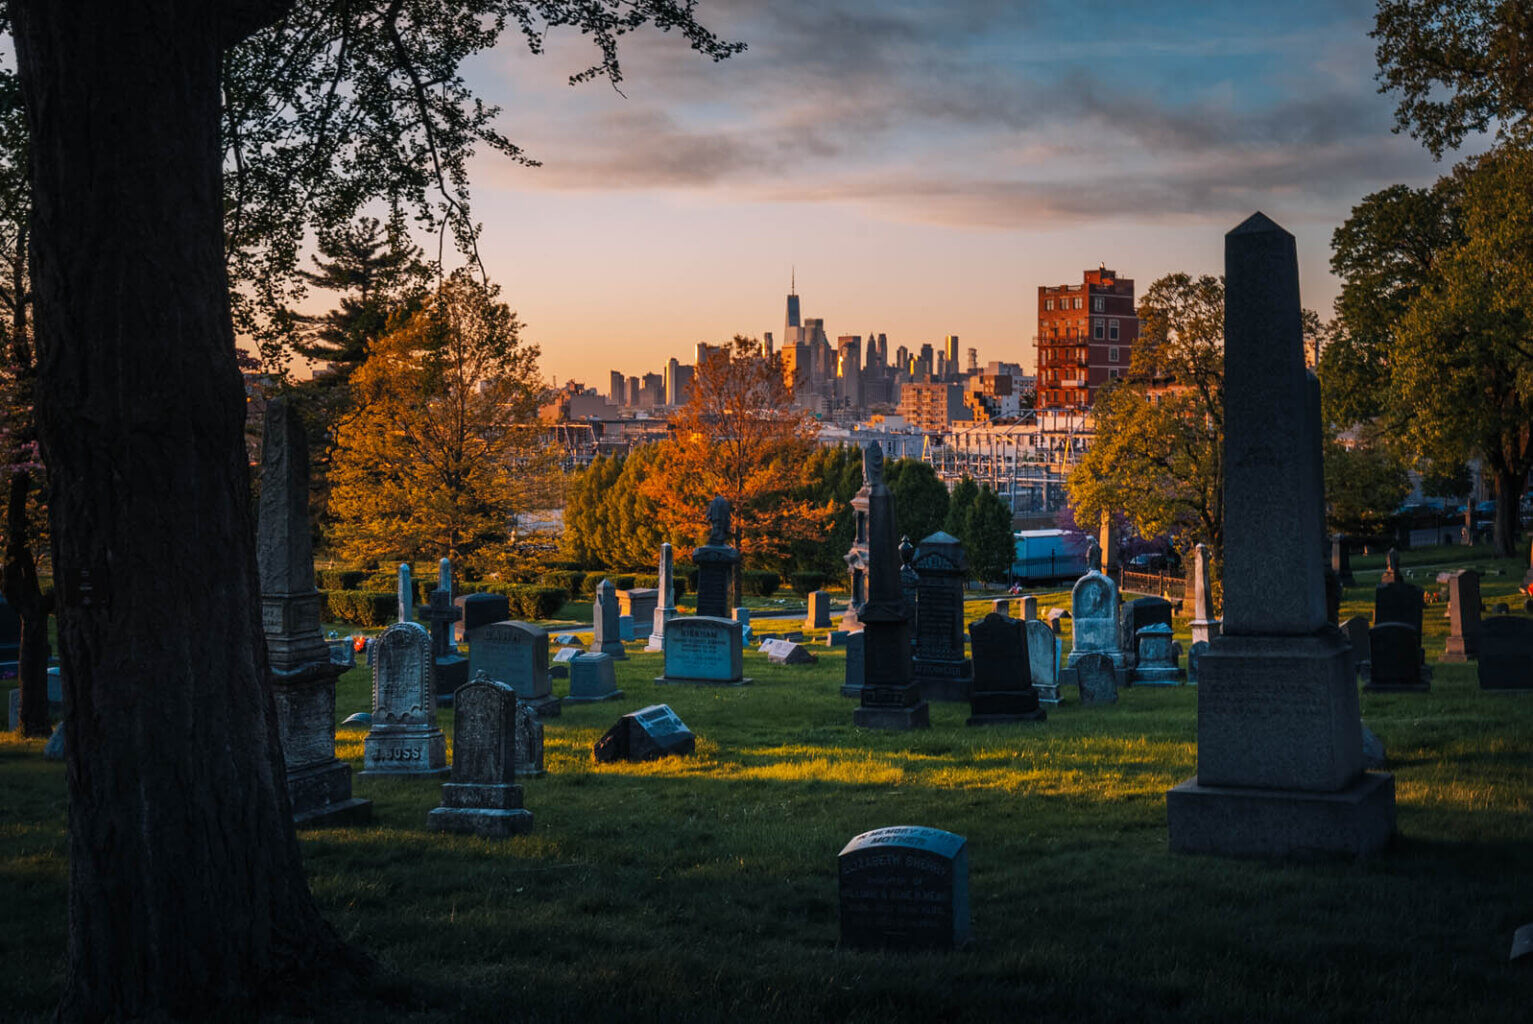 gorgeous sunset view at Green-wood cemetery in Brooklyn